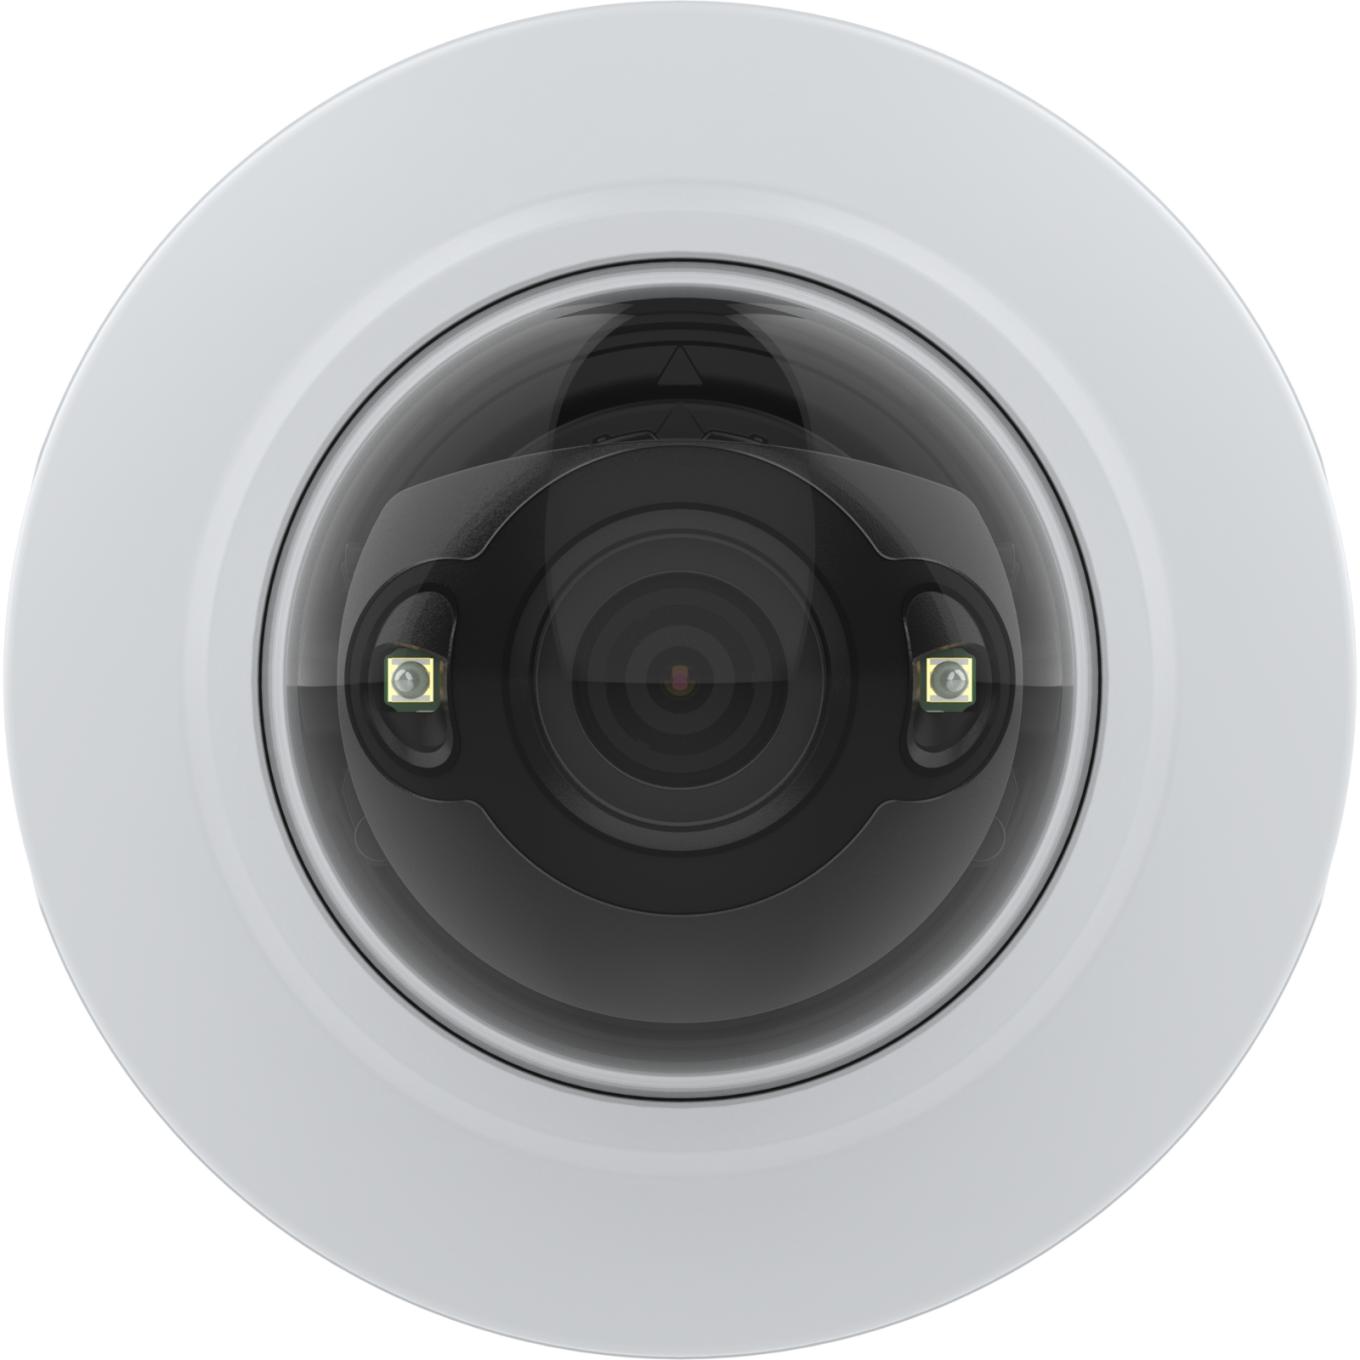 AXIS M4218-LV Dome Camera | Axis Communications